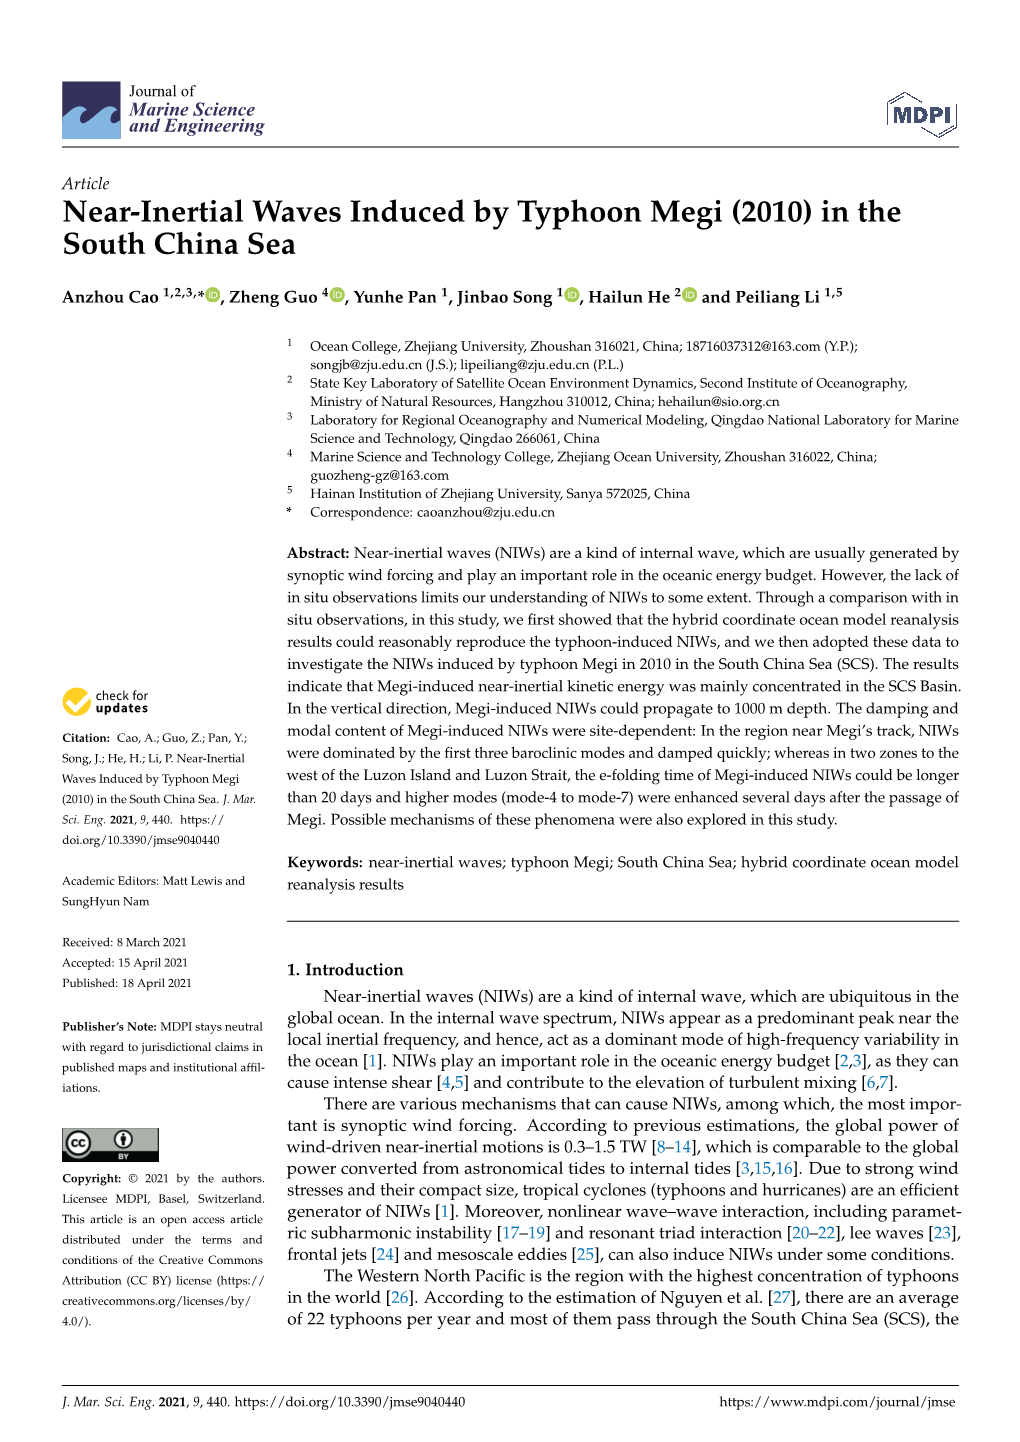 Near-Inertial Waves Induced by Typhoon Megi (2010) in the South China Sea